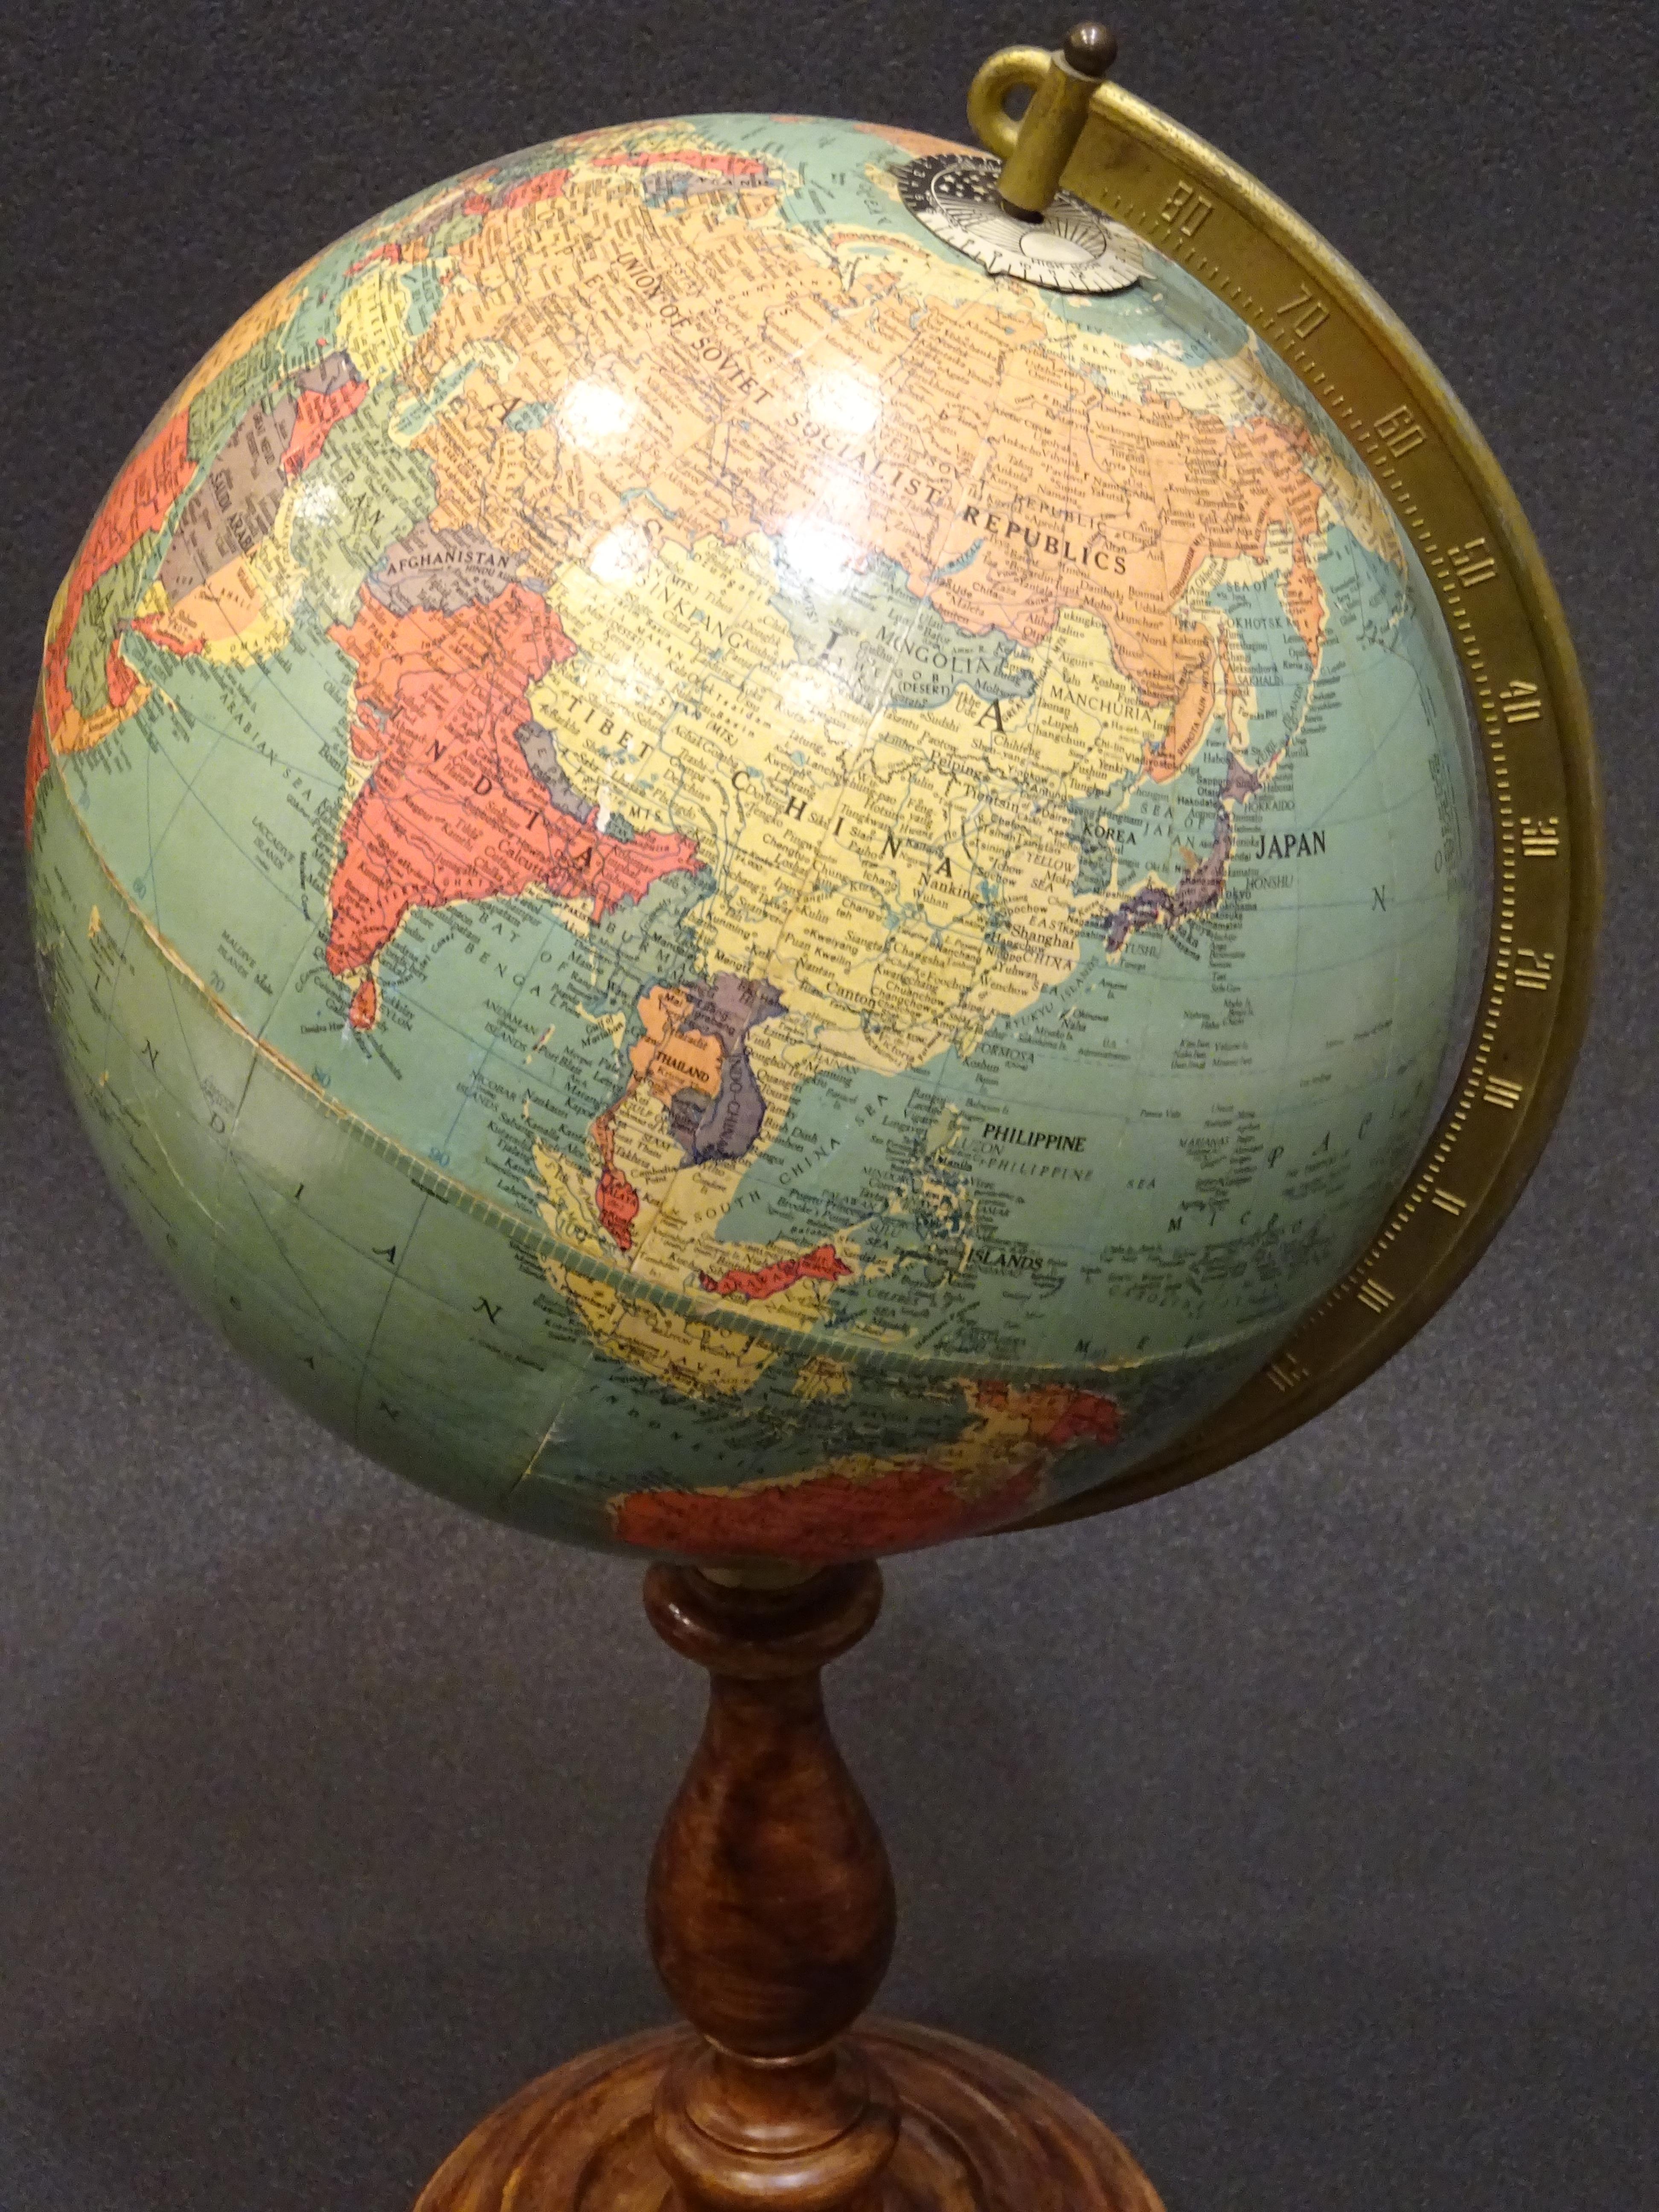 American Replogle Globes Chicago 1950s Papiermache, Wood and Metal World Globe